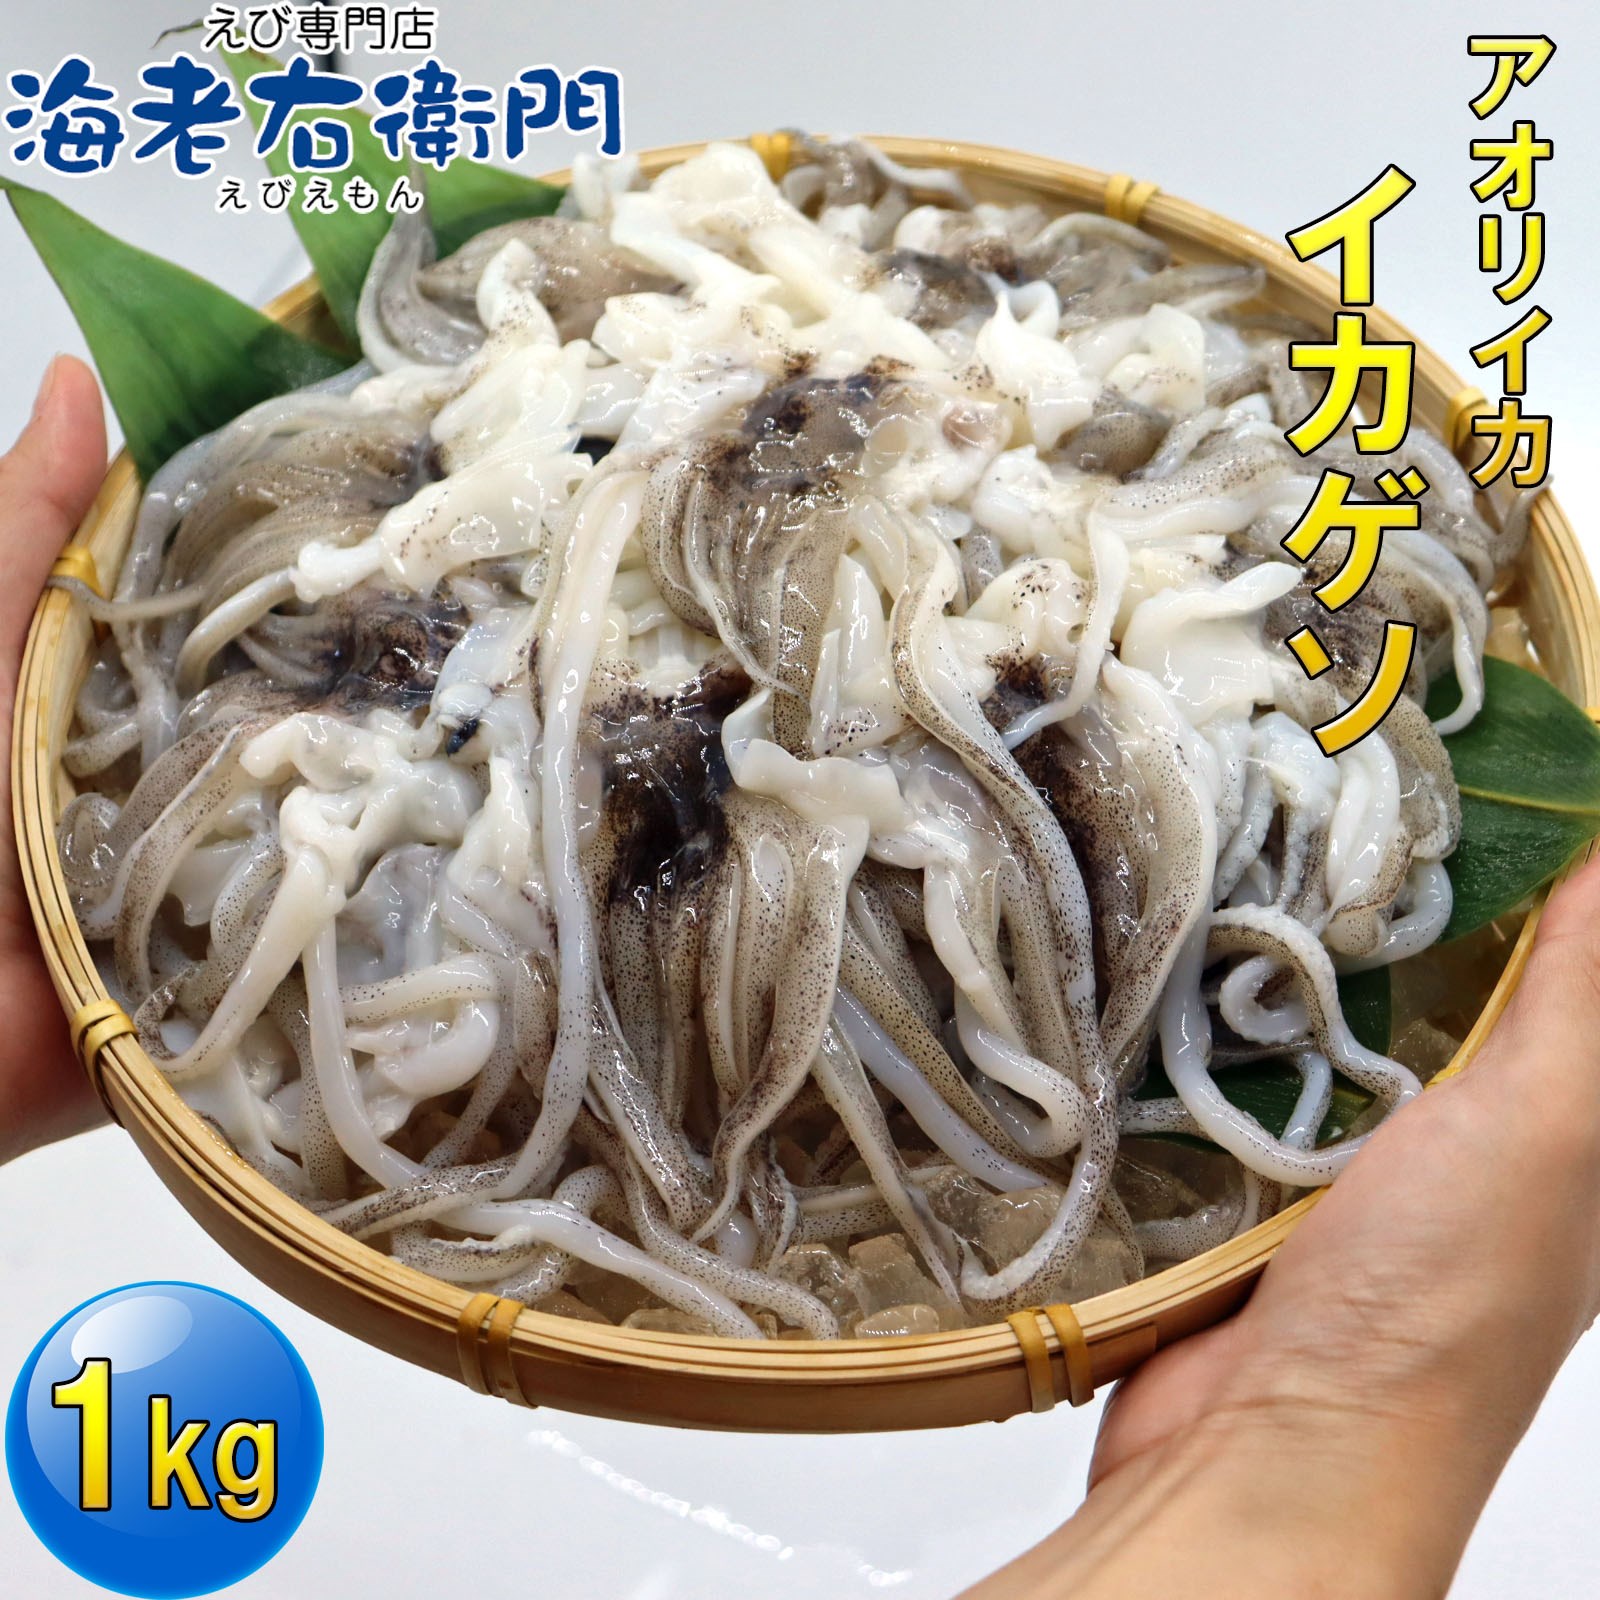  sea . right .. Sri Lanka flap squid geso1kg softly .... strong flap squid geso salt roasting recommended squid under pair ...... barbecue .. present 20/30 business use 